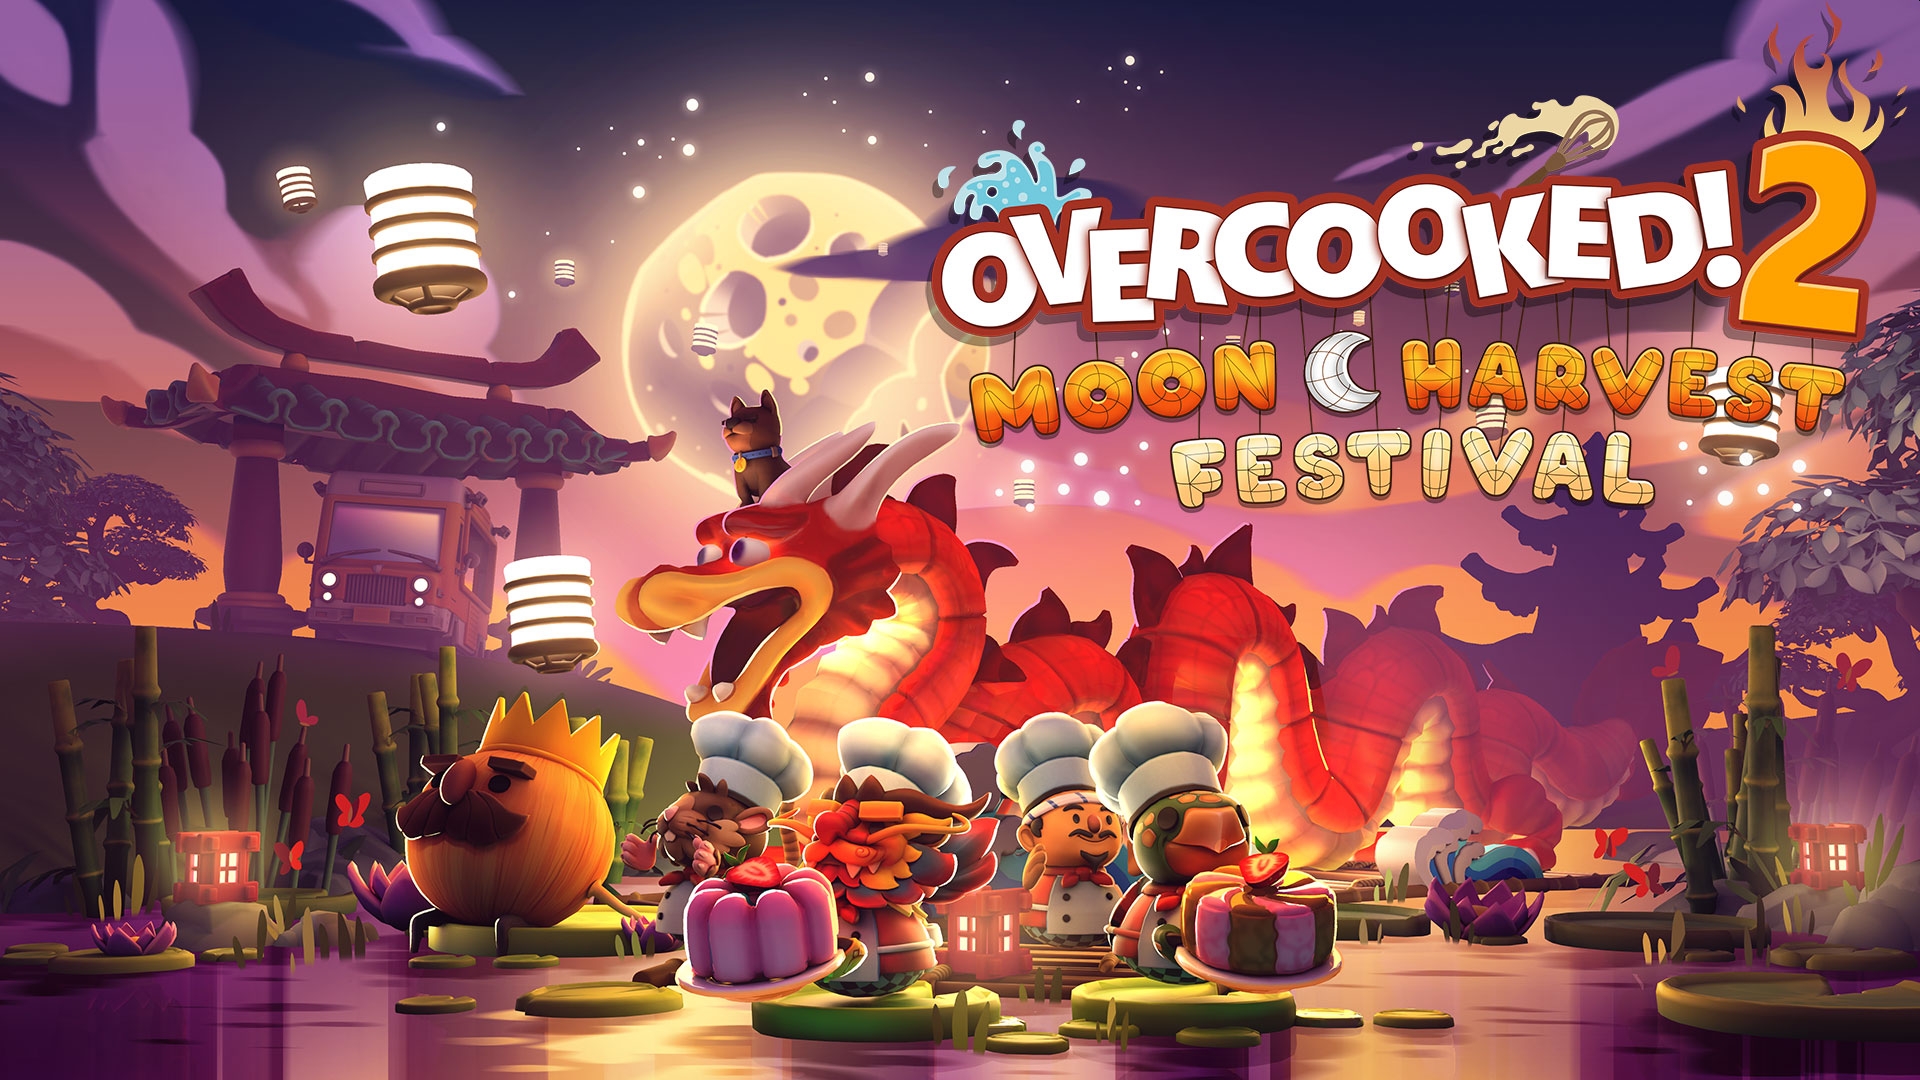 Overcooked! 2 Celebrates The Mid-Autumn Festival With New Moon Harvest Update